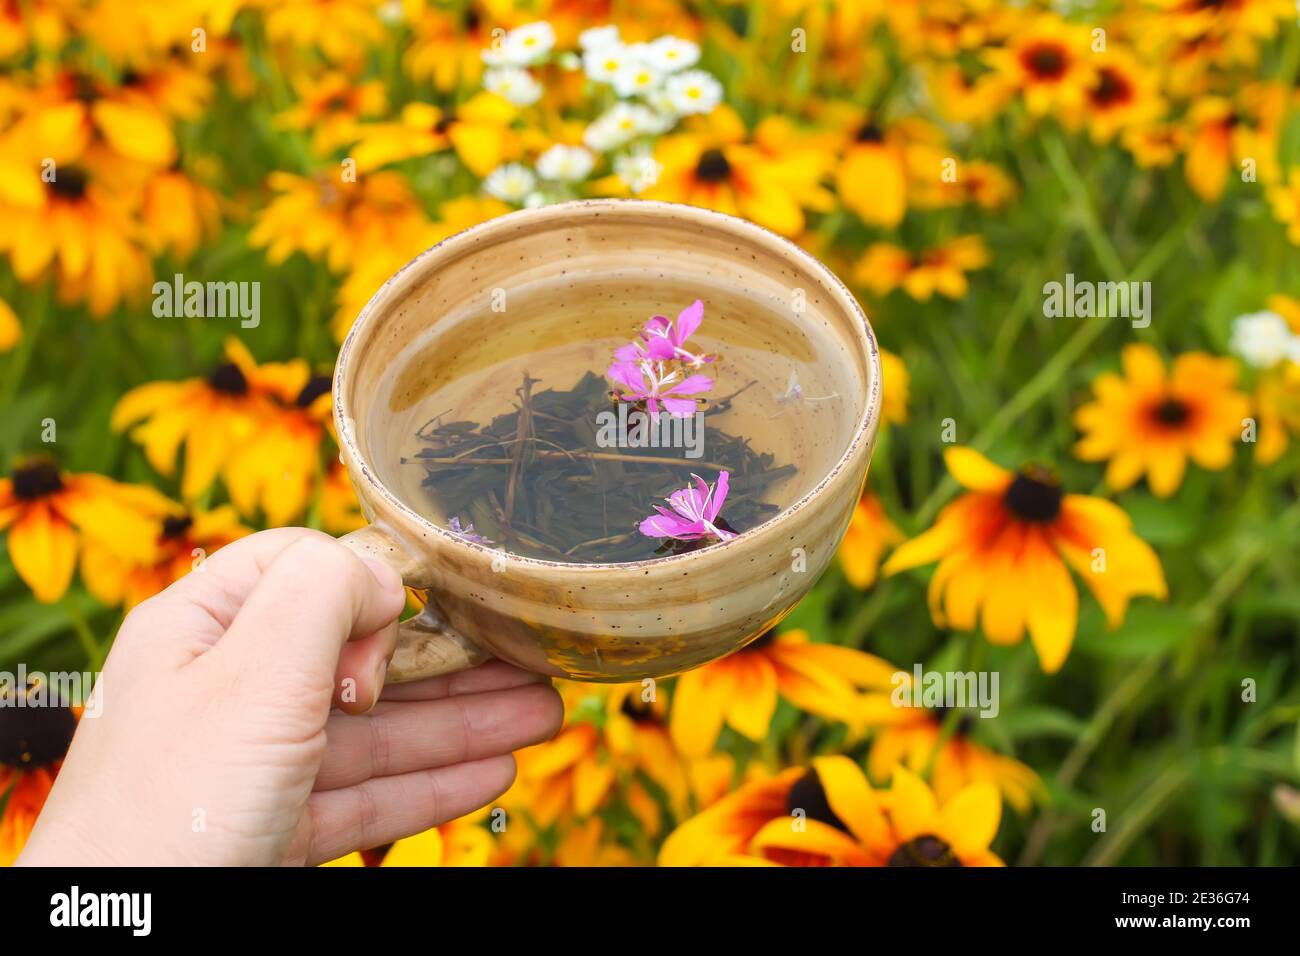 Natural herbal tea with purple flowers of fireweed plant in ceramic cup in a hand on summer rudbeckia flowers background. Stock Photo